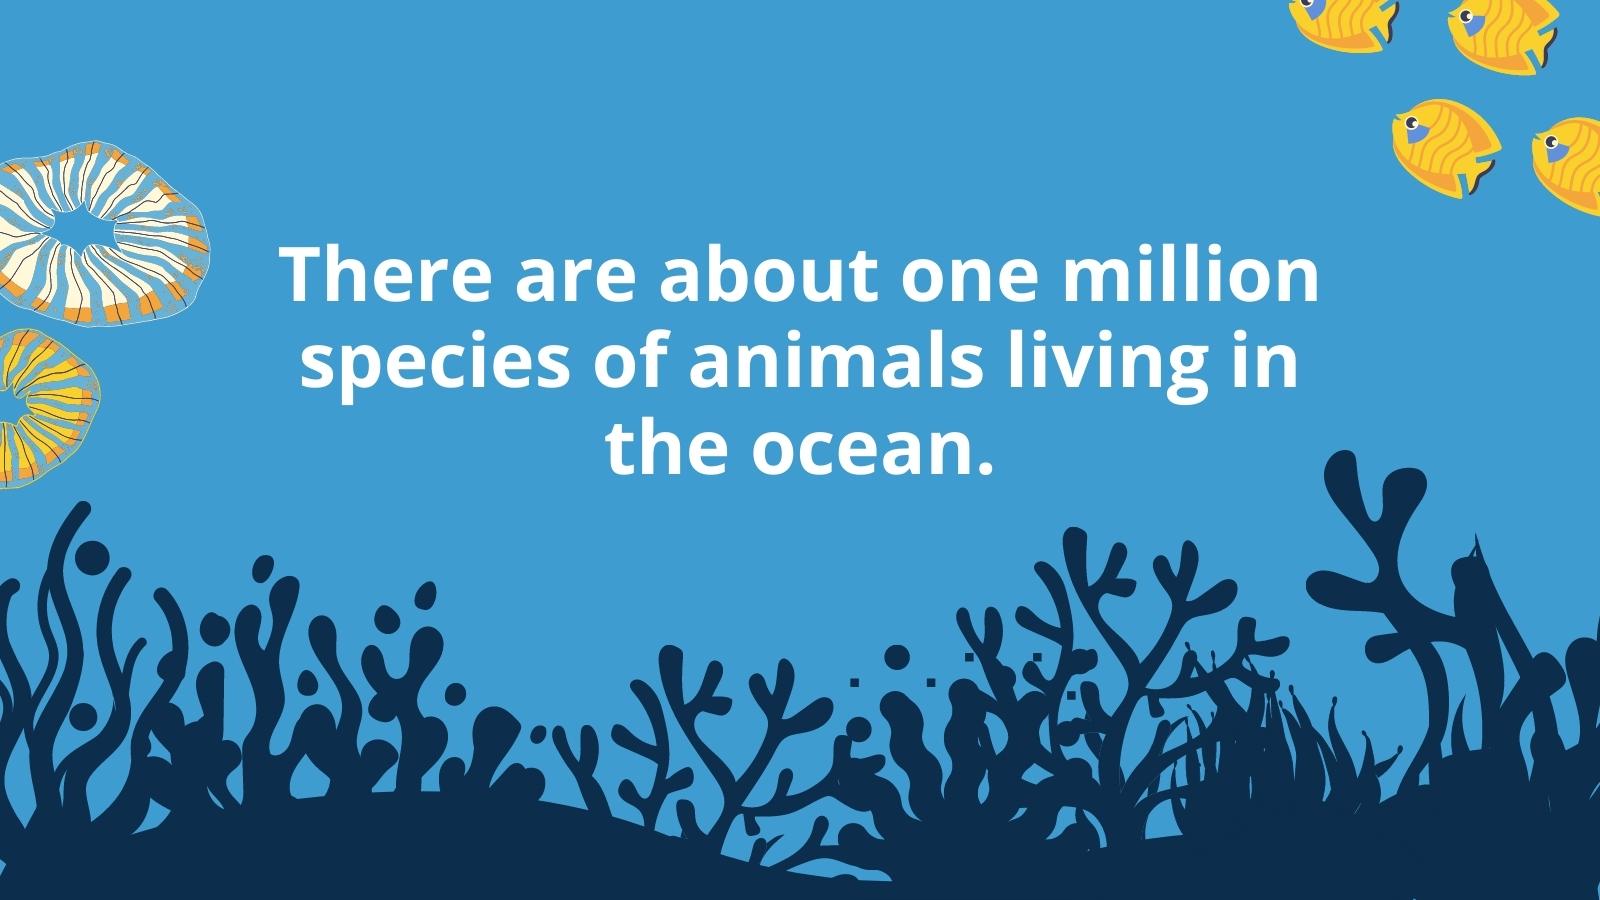 There are about one million species of animals living in the ocean.